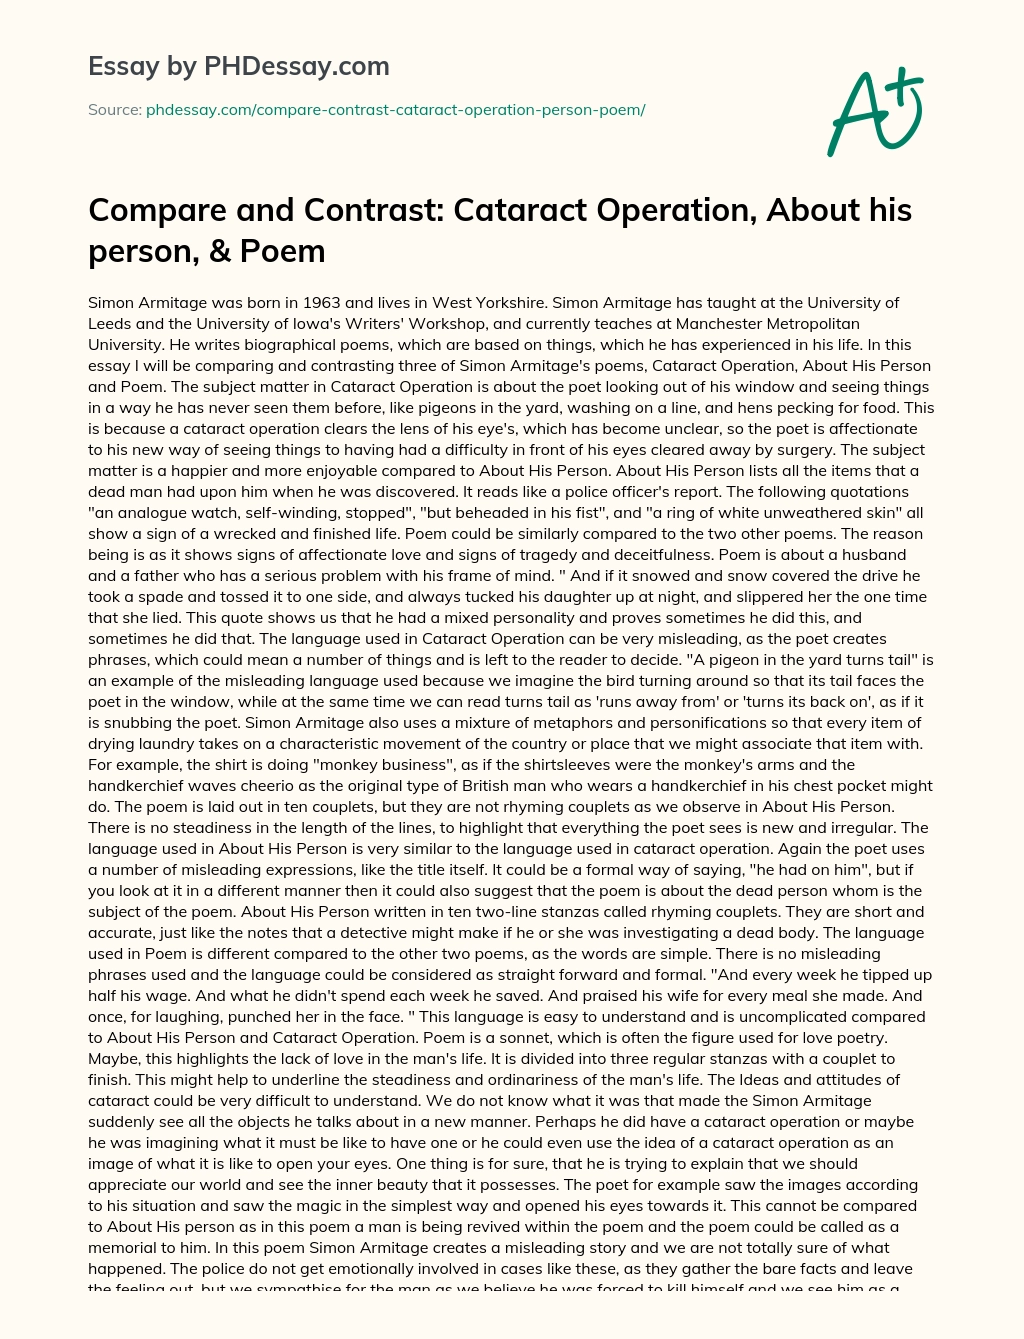 Compare and Contrast: Cataract Operation, About his person, & Poem essay